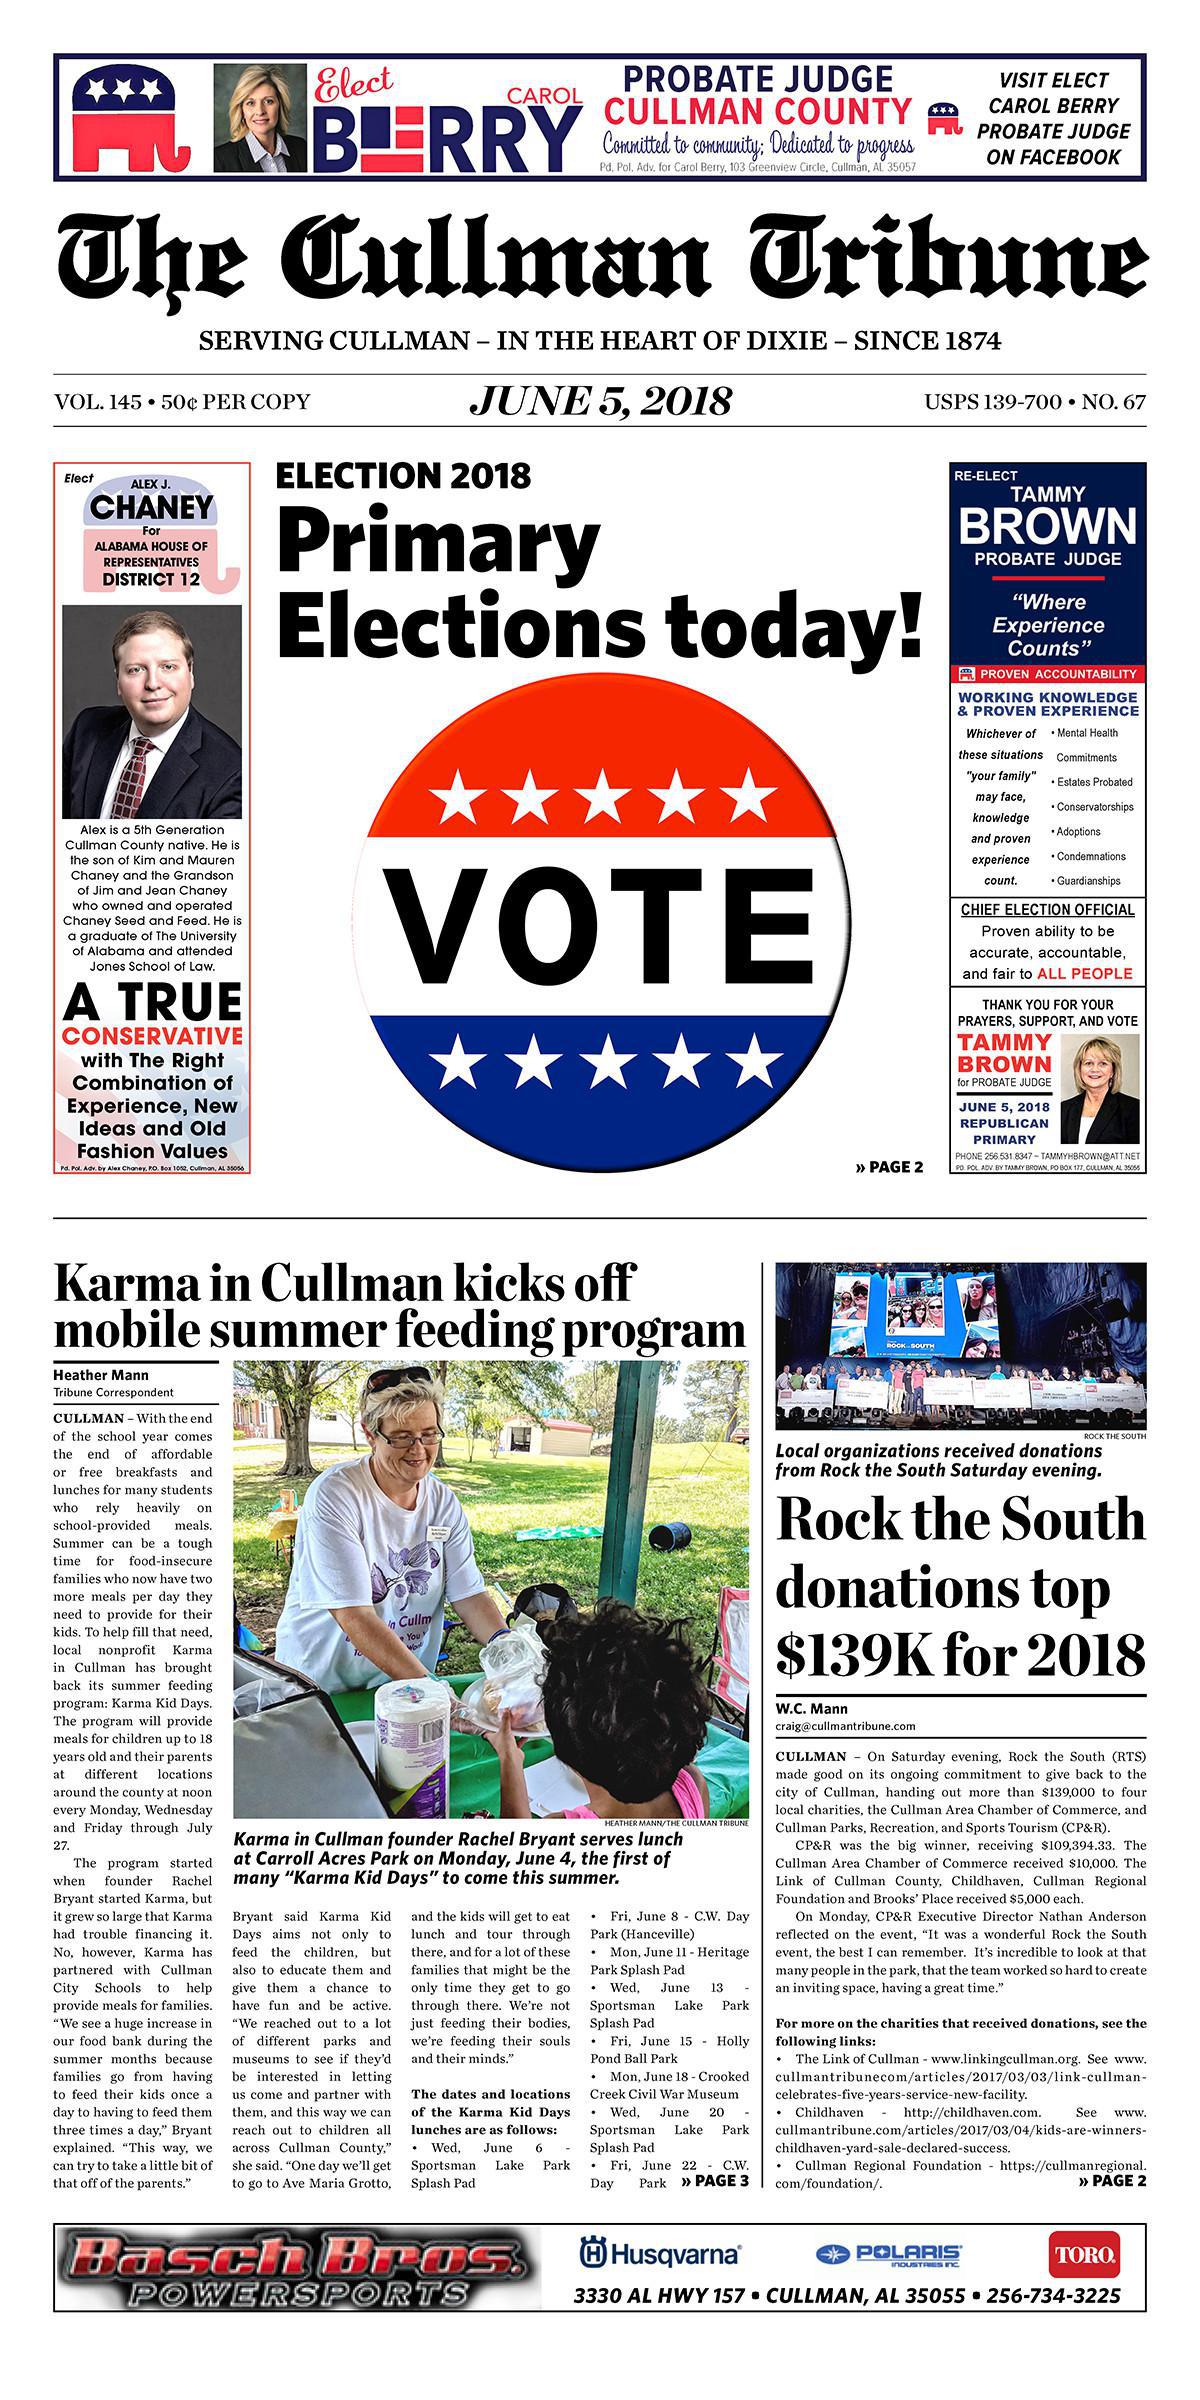 Good Morning Cullman! The 06-05-2018 edition of the Cullman Tribune is now ready to view